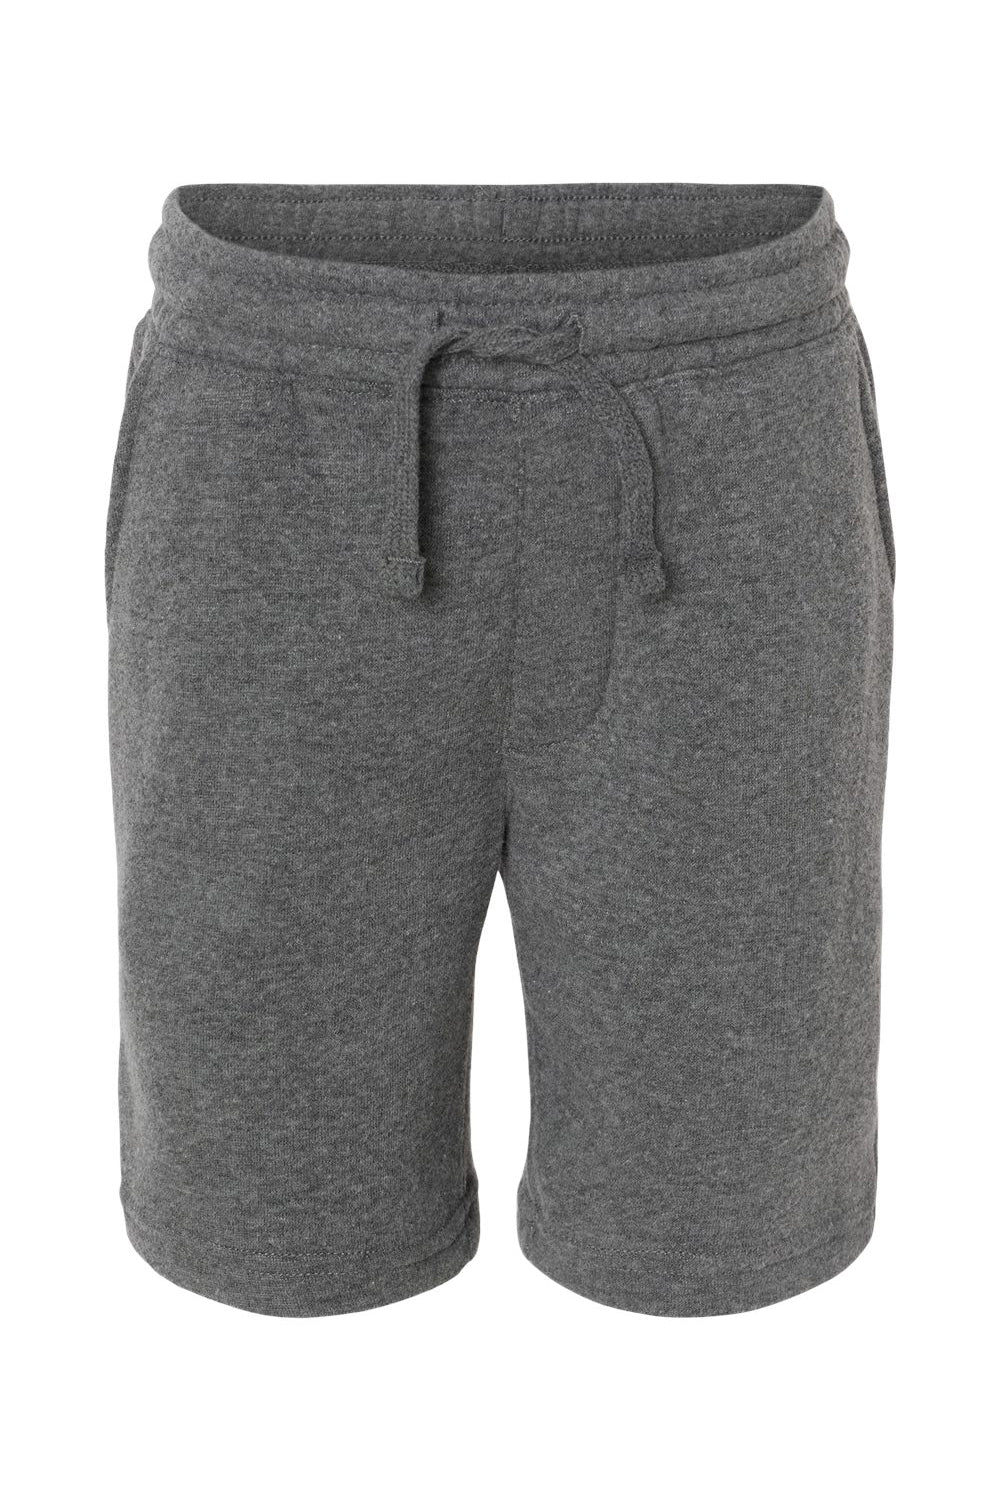 Independent Trading Co. PRM16SRT Youth Special Blend Fleece Shorts w/ Pockets Nickel Grey Flat Front